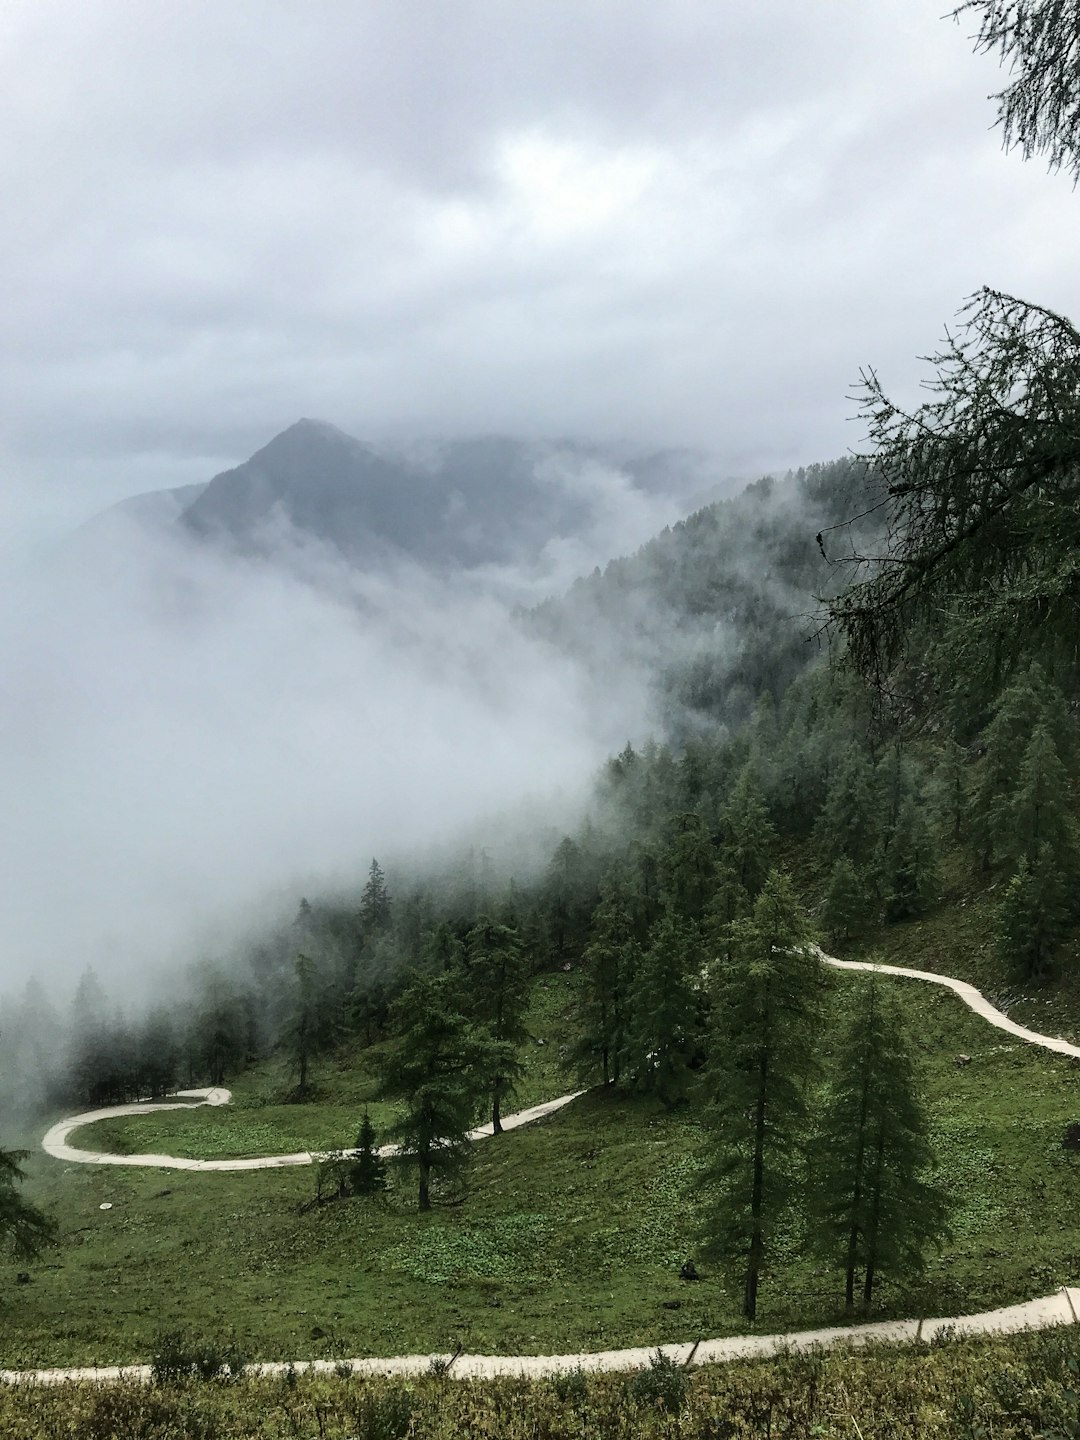 Travel Tips and Stories of Parc National de Berchtesgaden in Germany